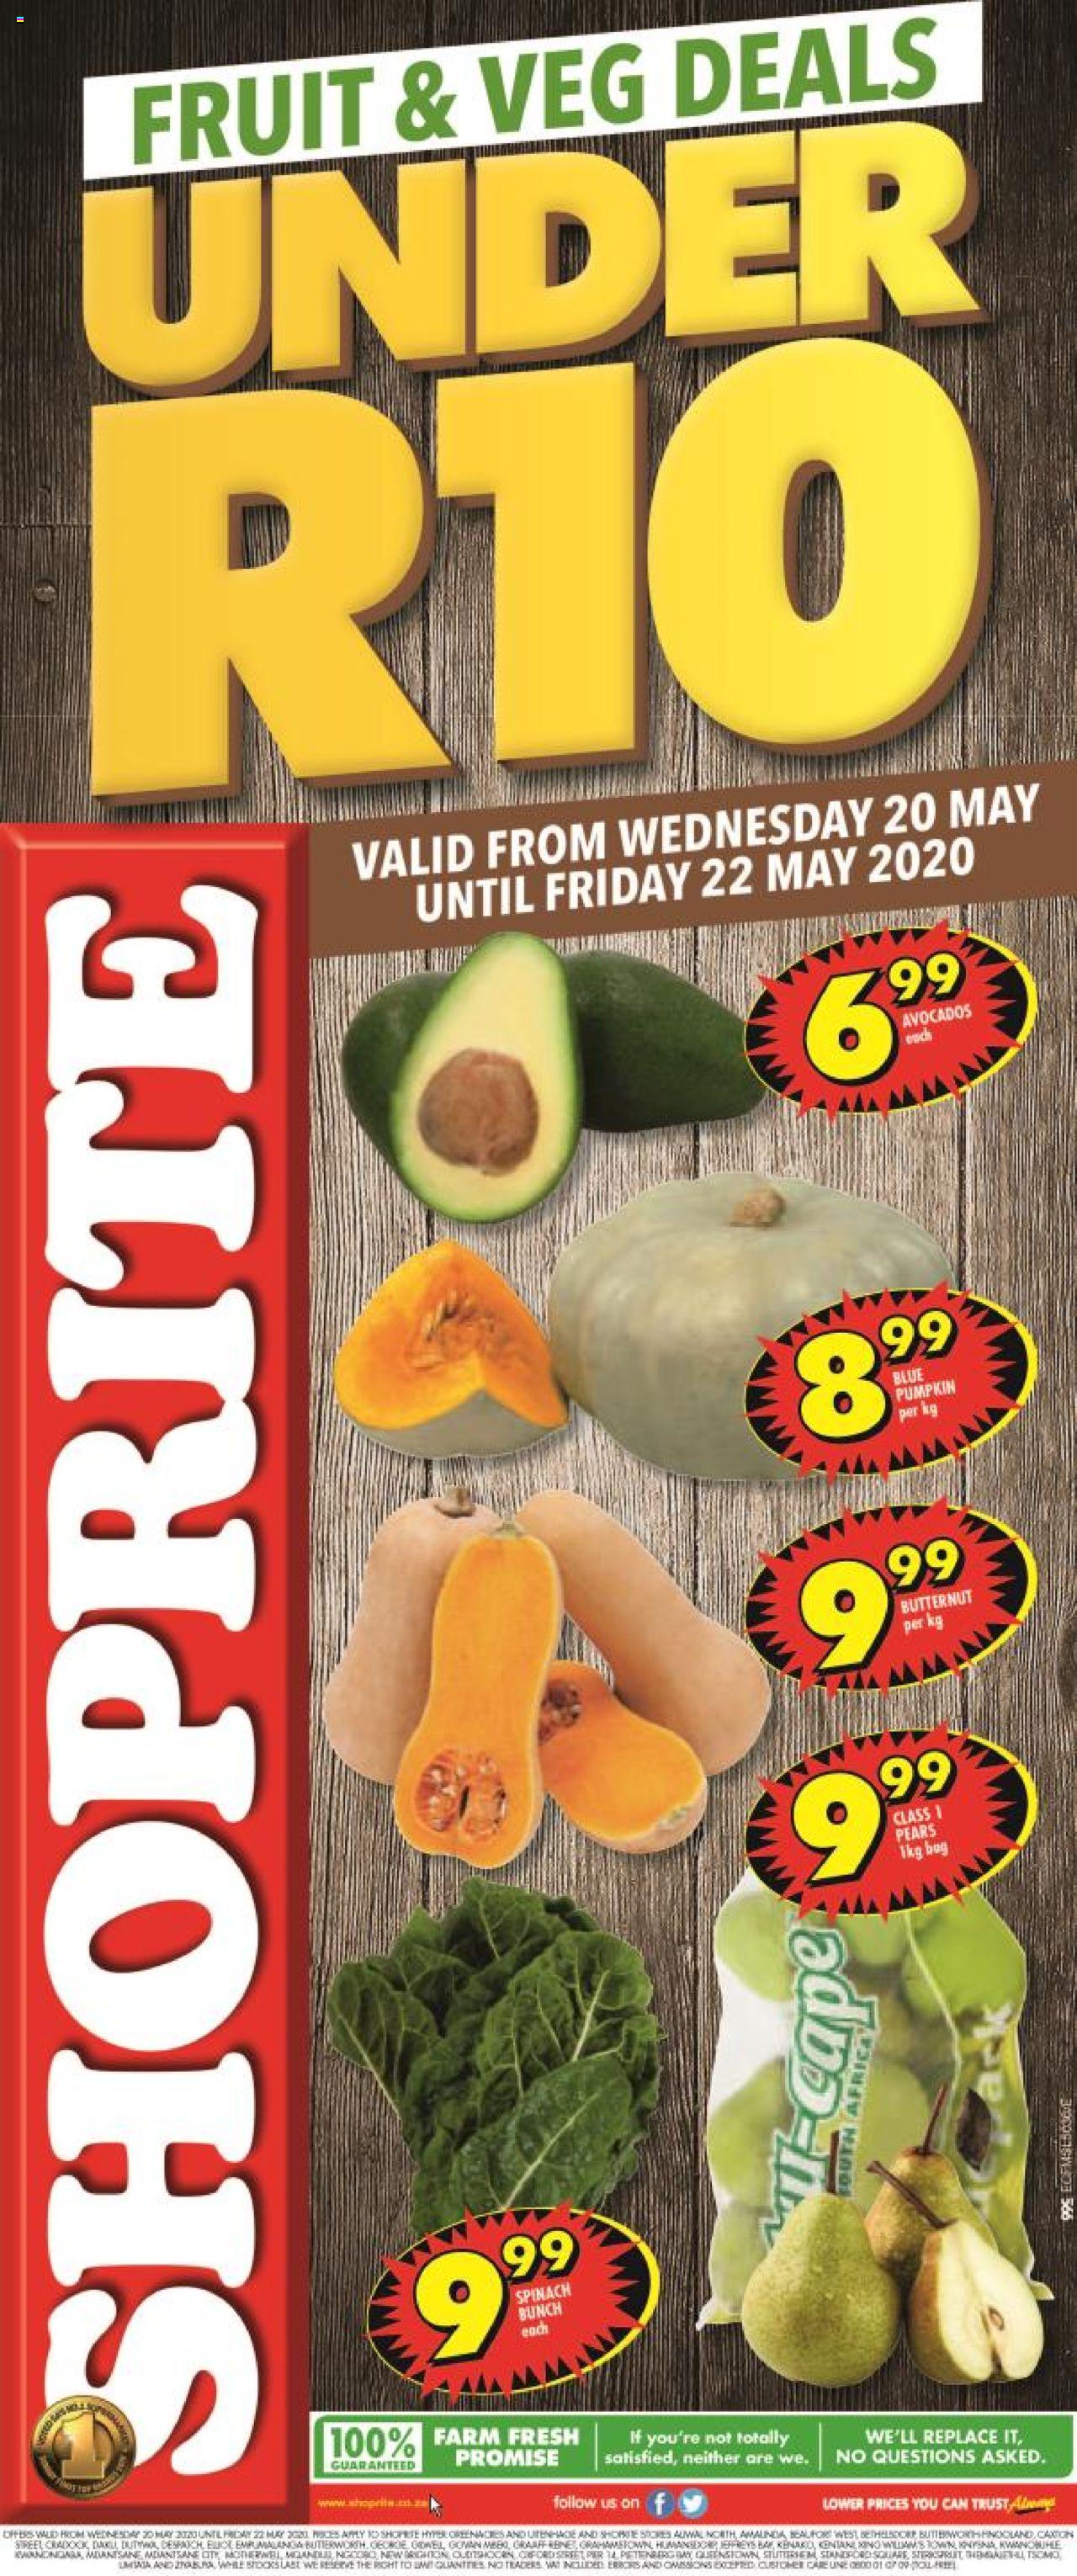 Shoprite Specials Fruit and Vegs 20 May 2020